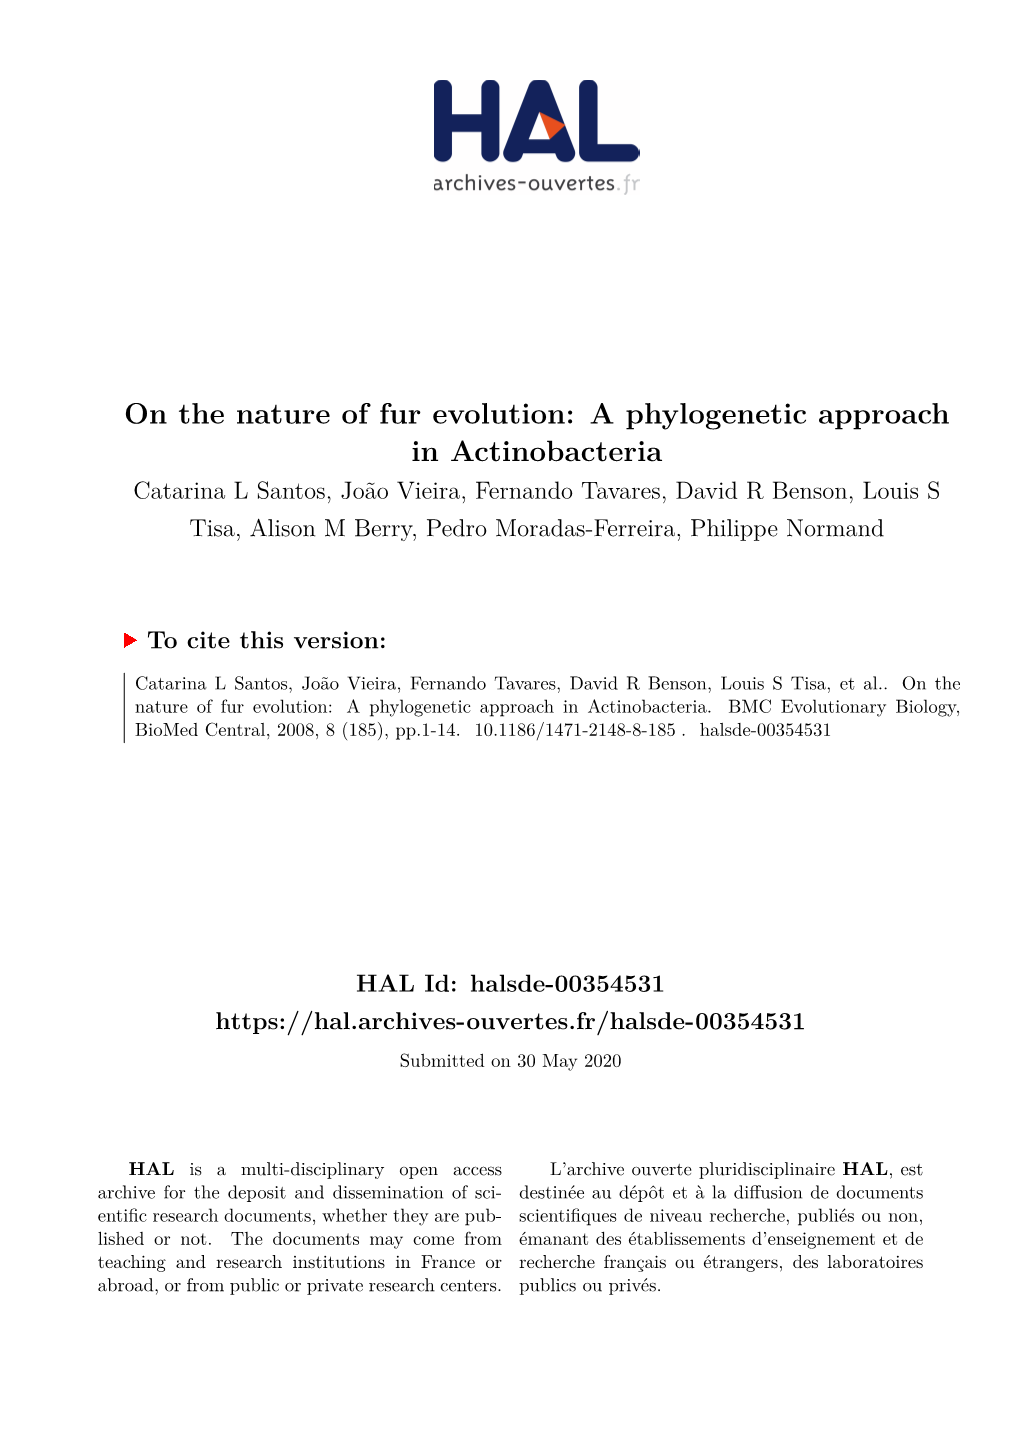 A Phylogenetic Approach in Actinobacteria